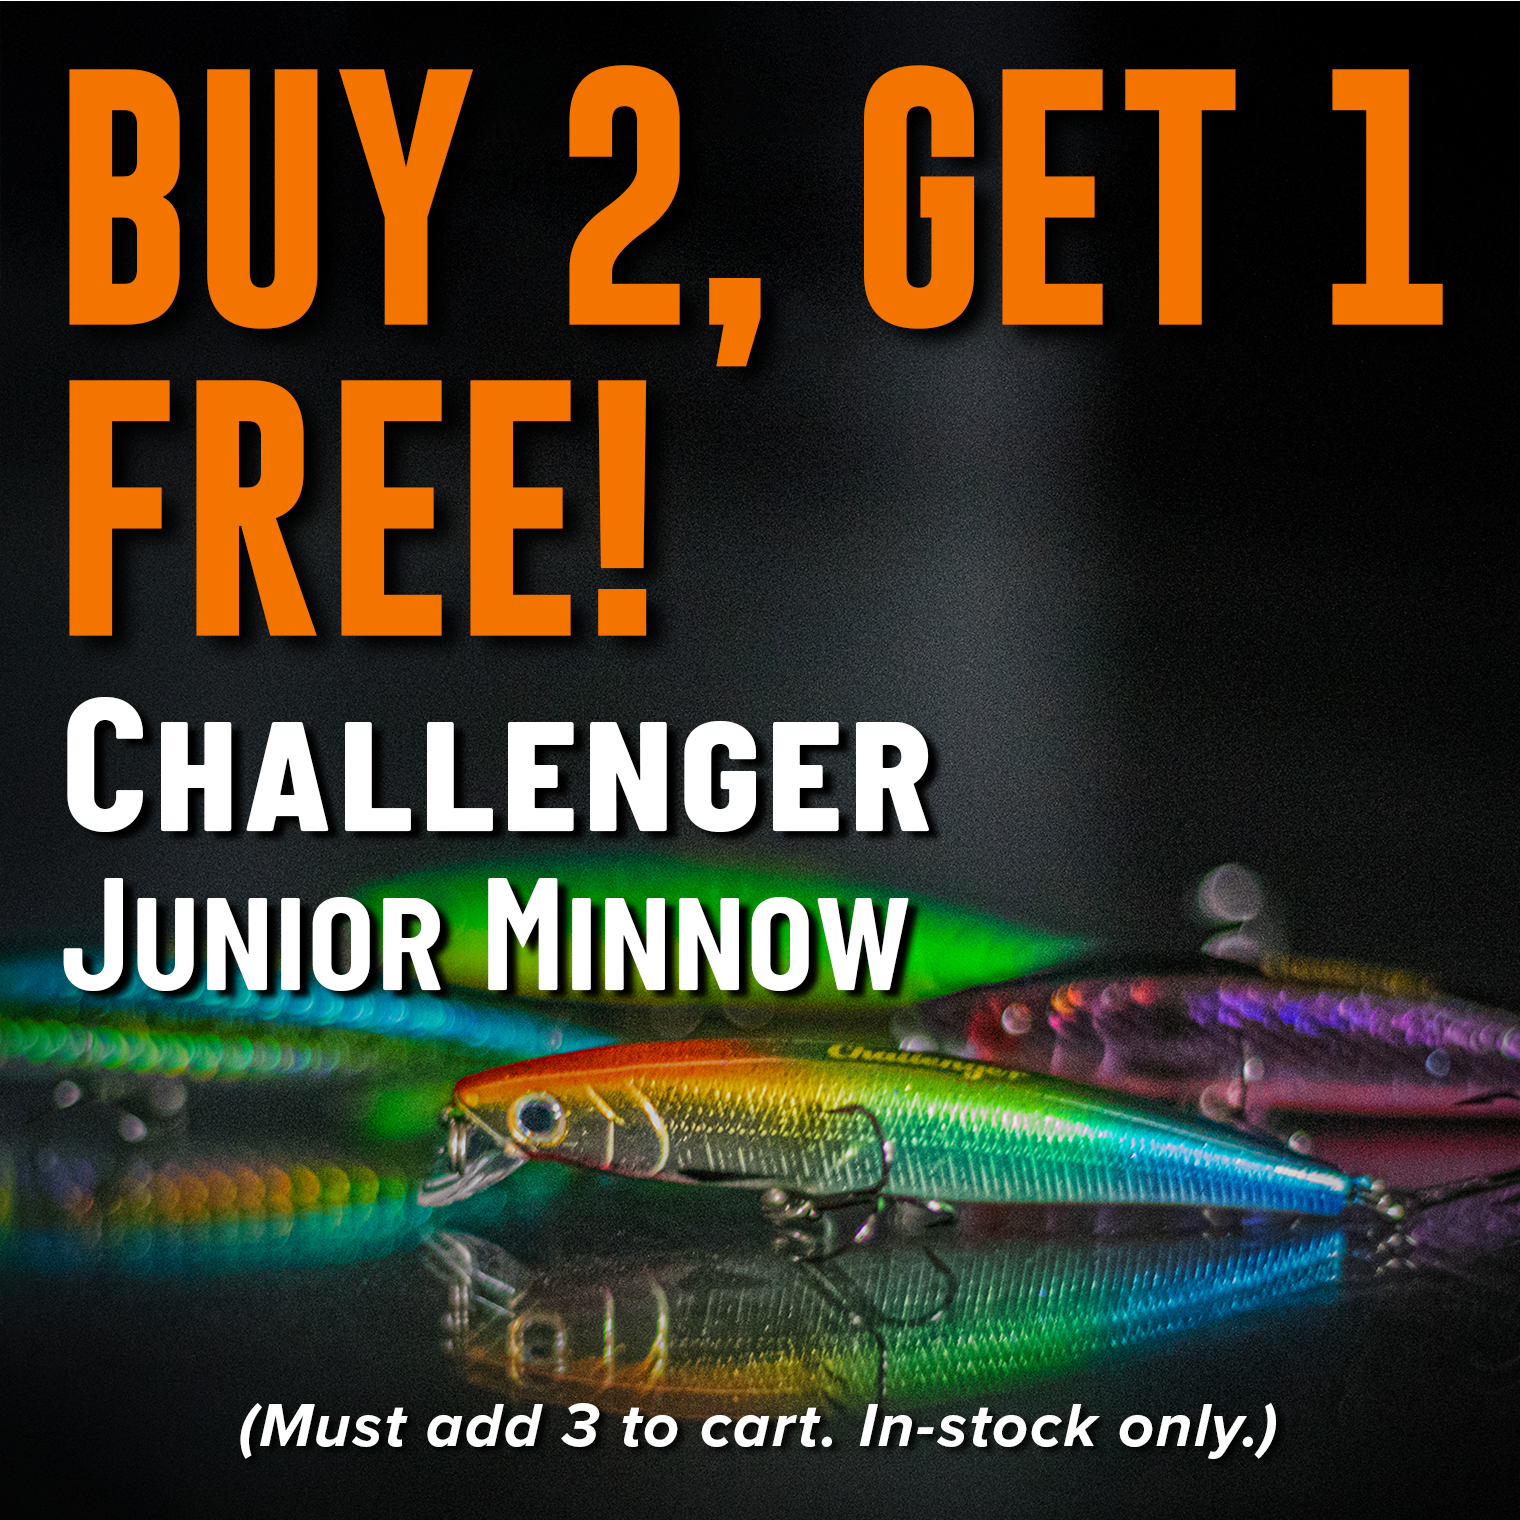 Buy 2, Get 1 Free! Challenger Junior Minnow (Must add 3 to cart. In-stock only.)